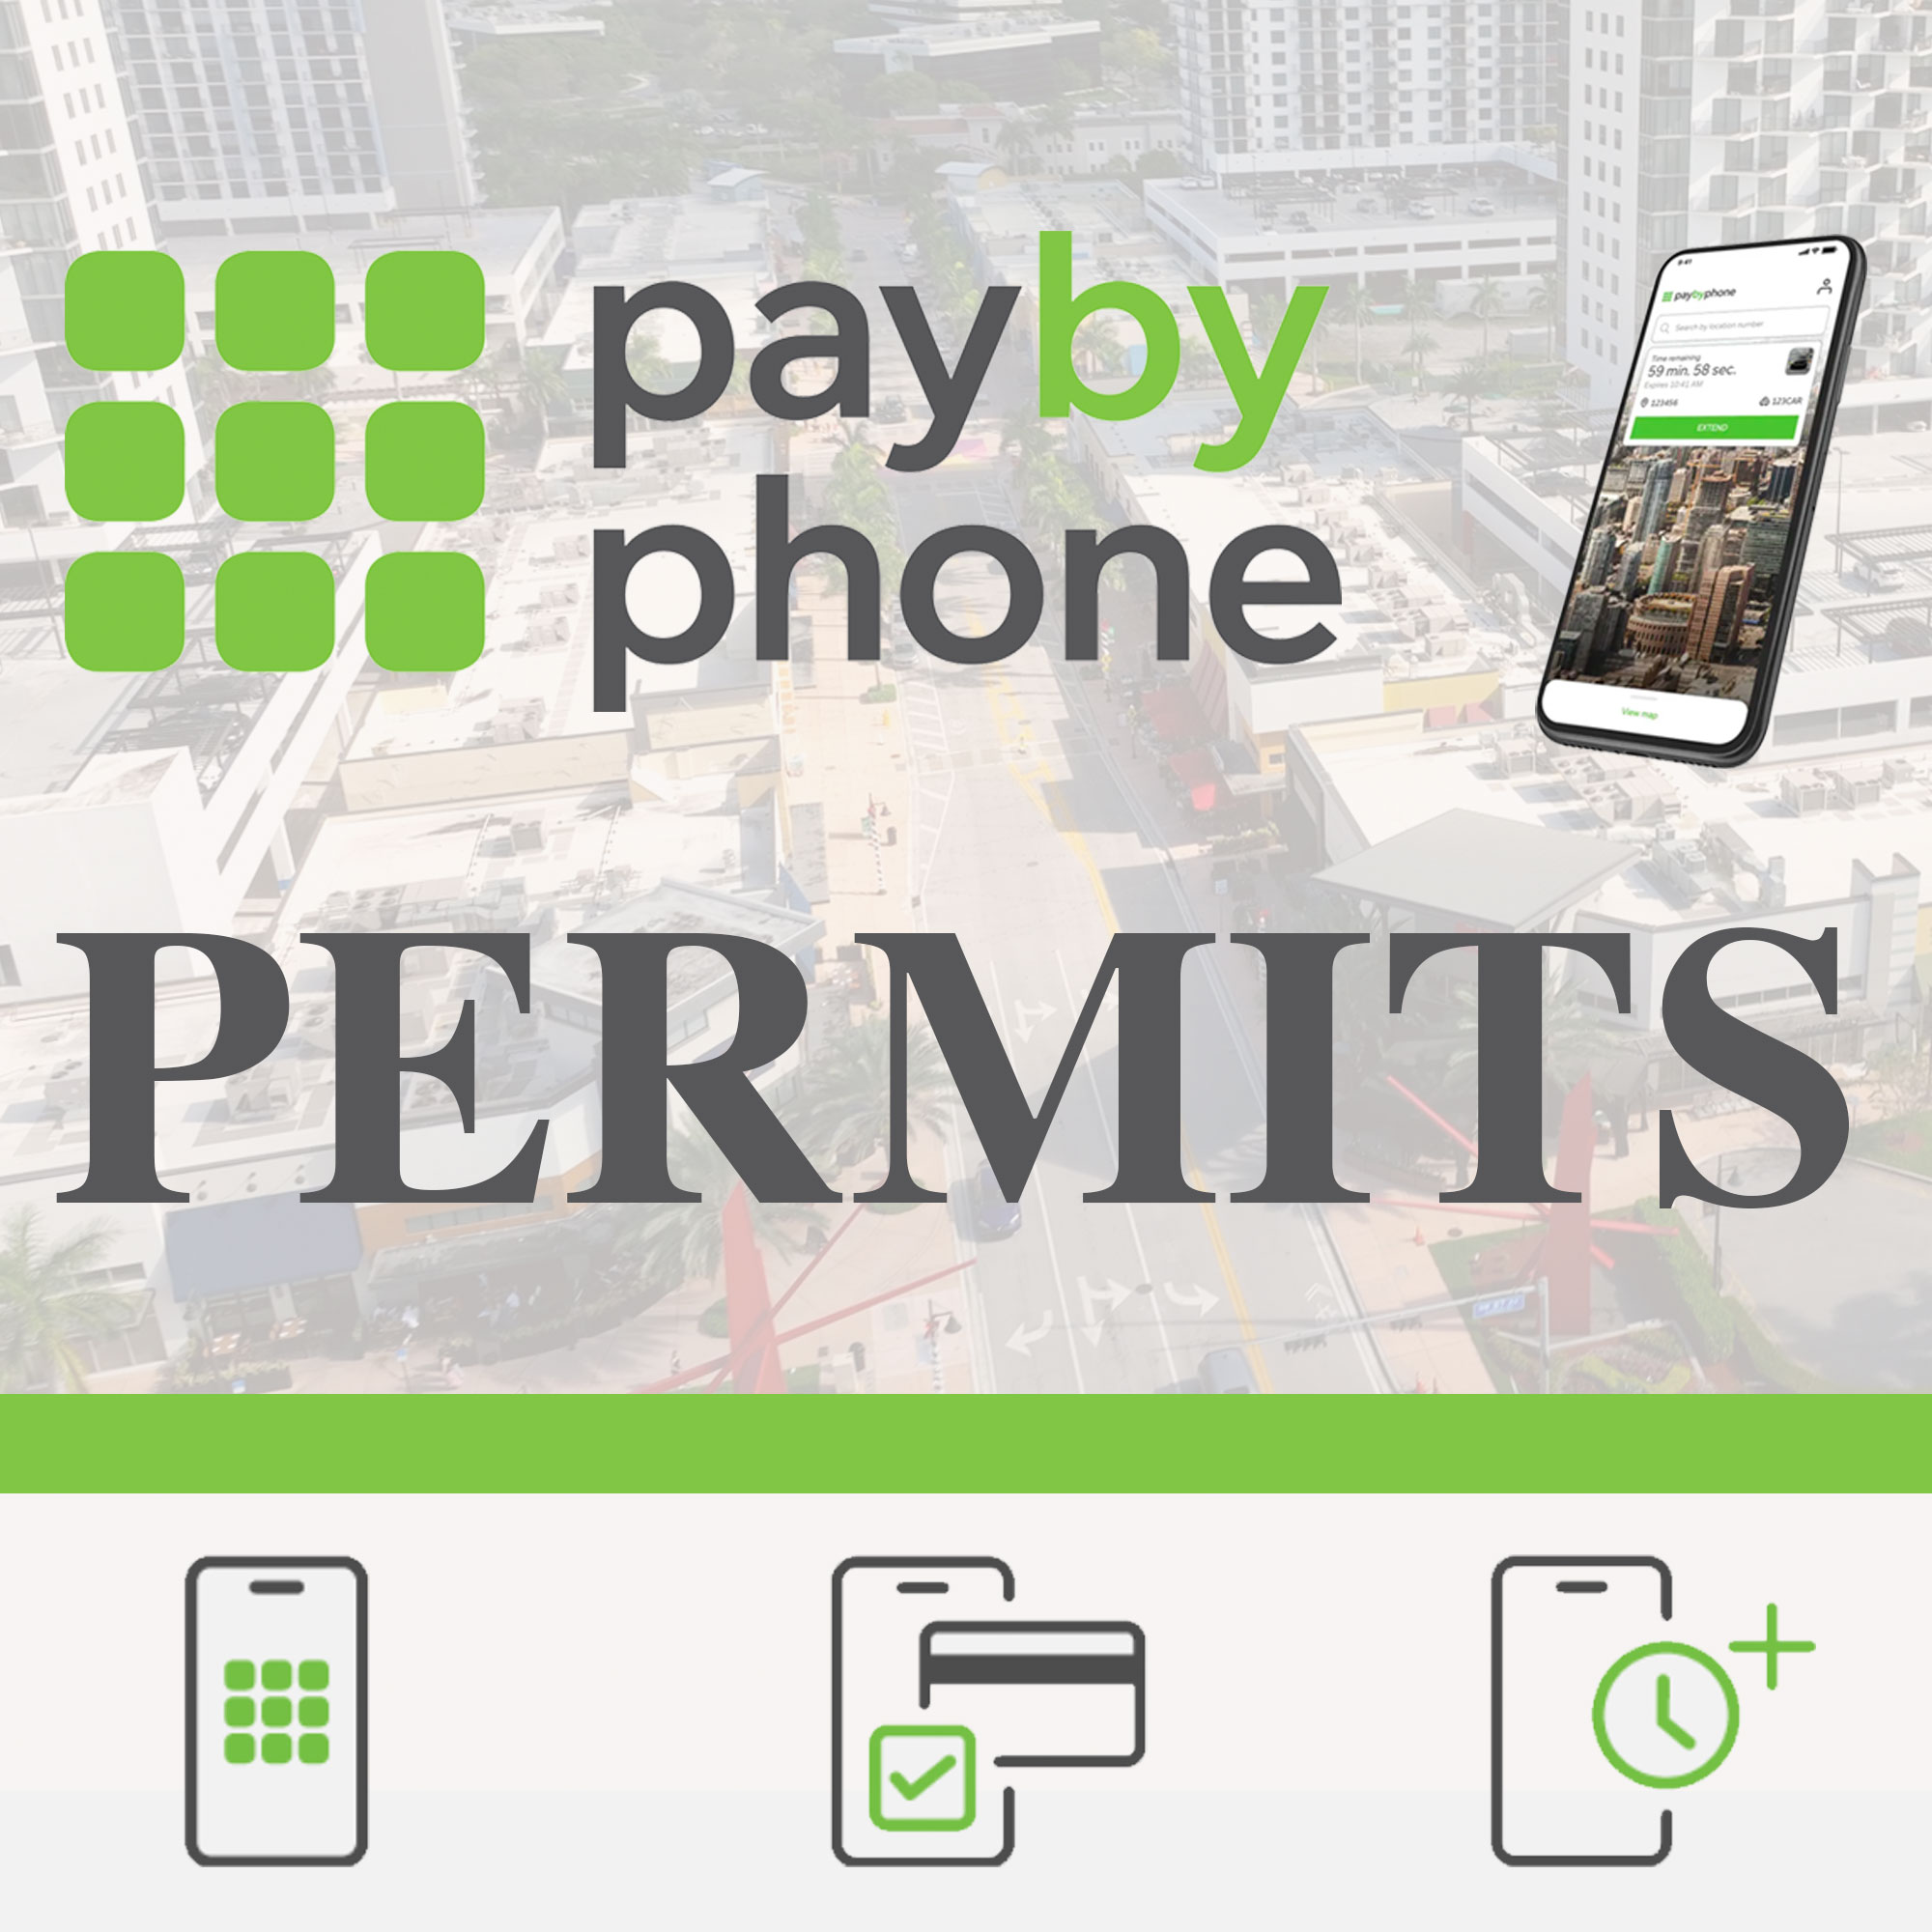 E-Permits for Parking Available Soon!